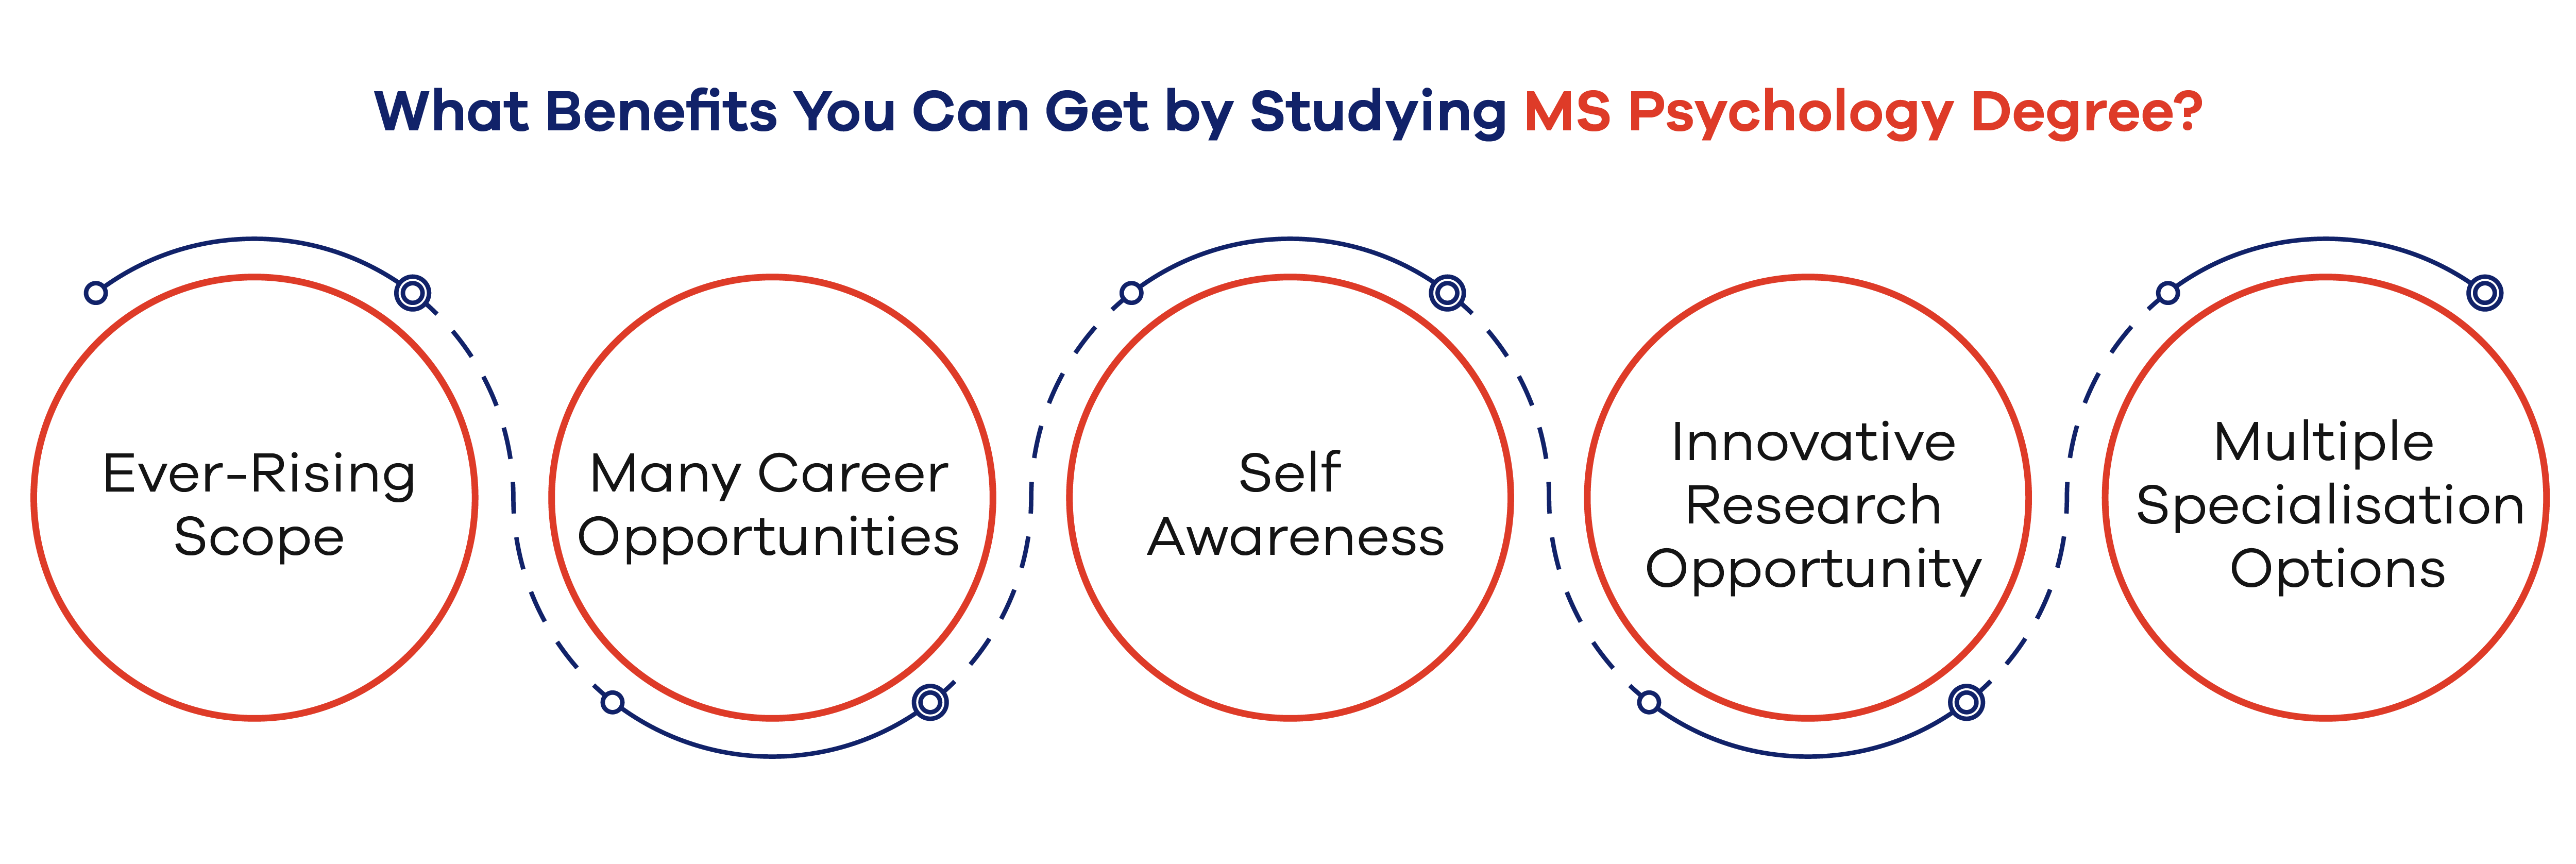 What Benefits You Can Get by Studying MS Psychology Degree? 